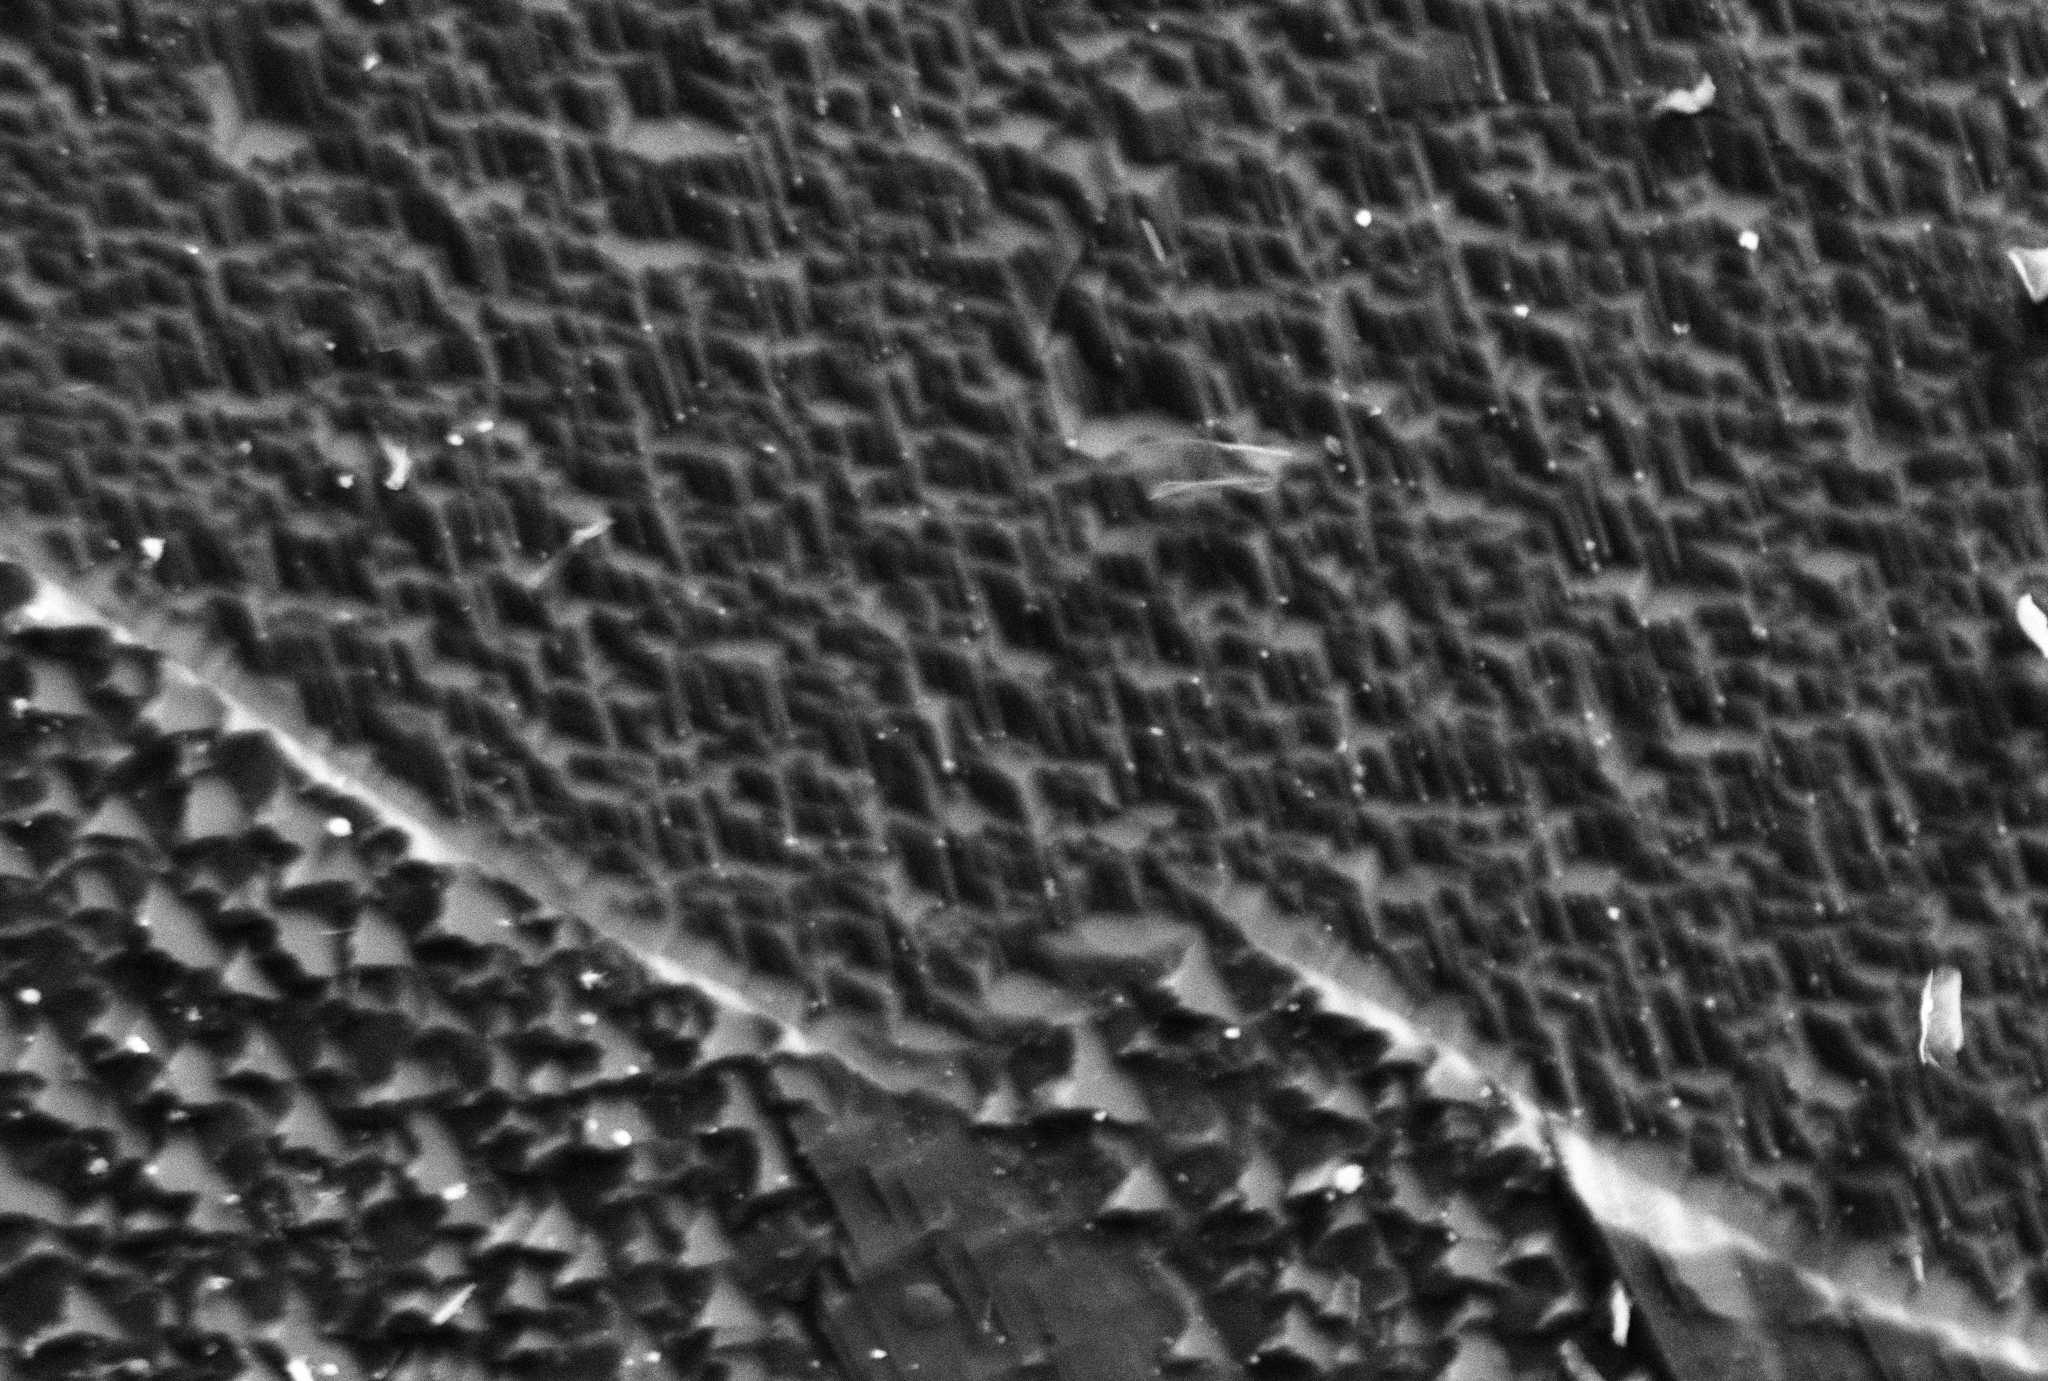 SEM image of a solar cell sample